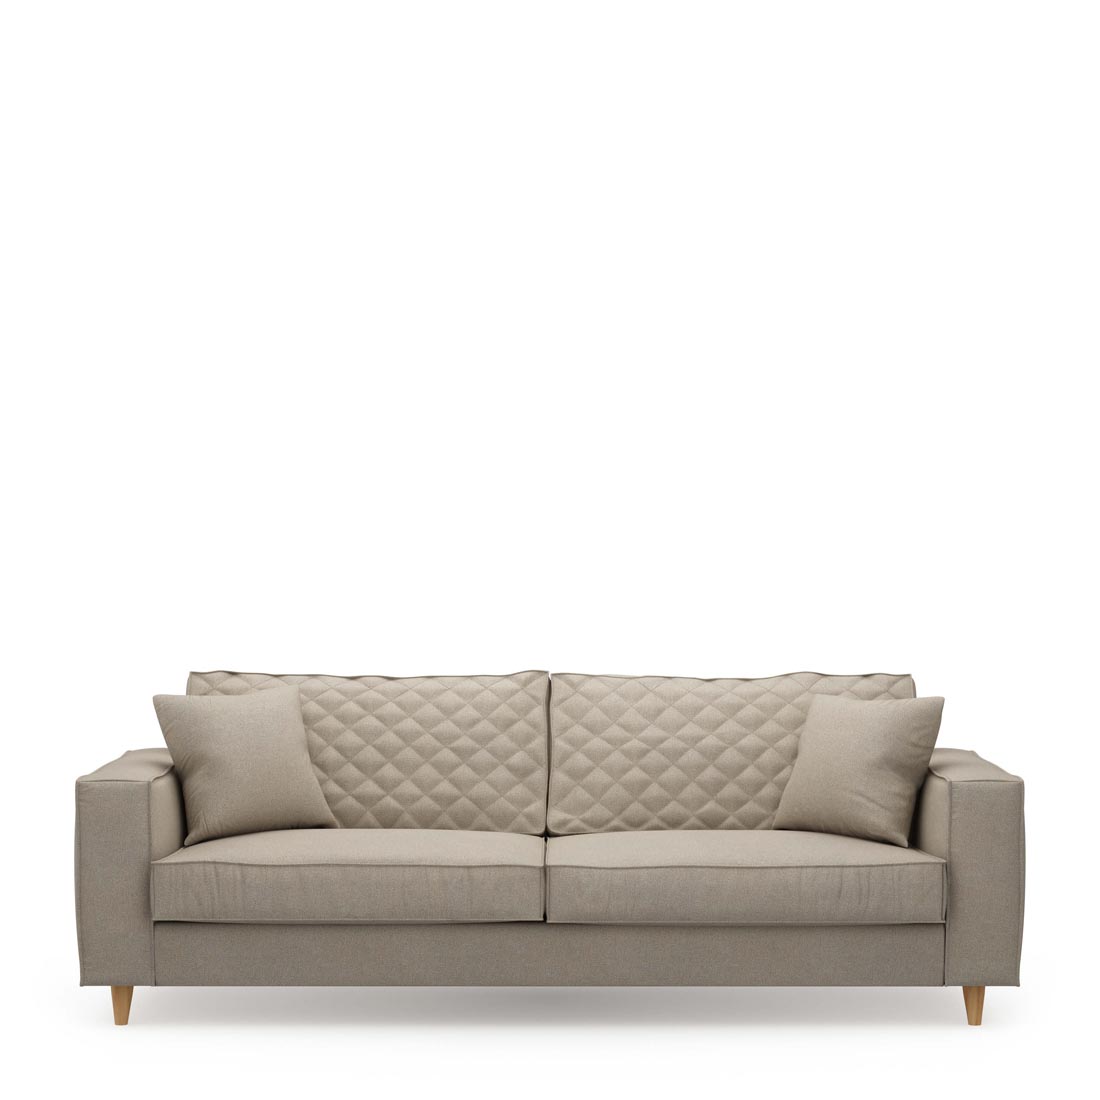 Rivièra Maison Kendall Sofa 3,5 Seater, oxford weave, anvers flax